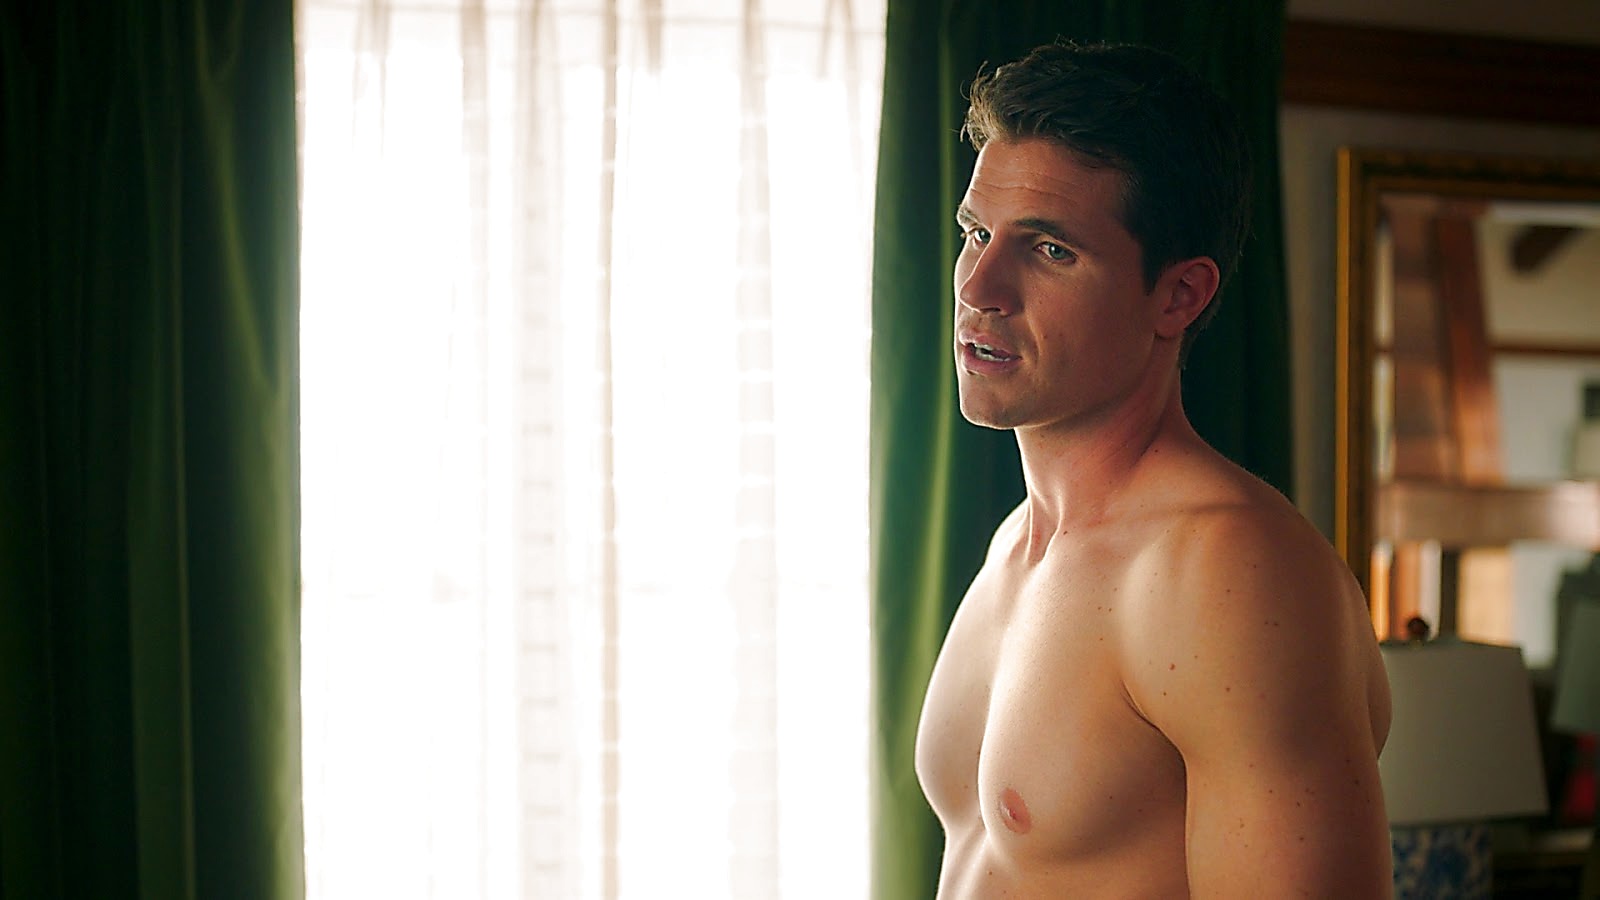 Robbie Amell sexy shirtless scene May 1, 2020, 1pm